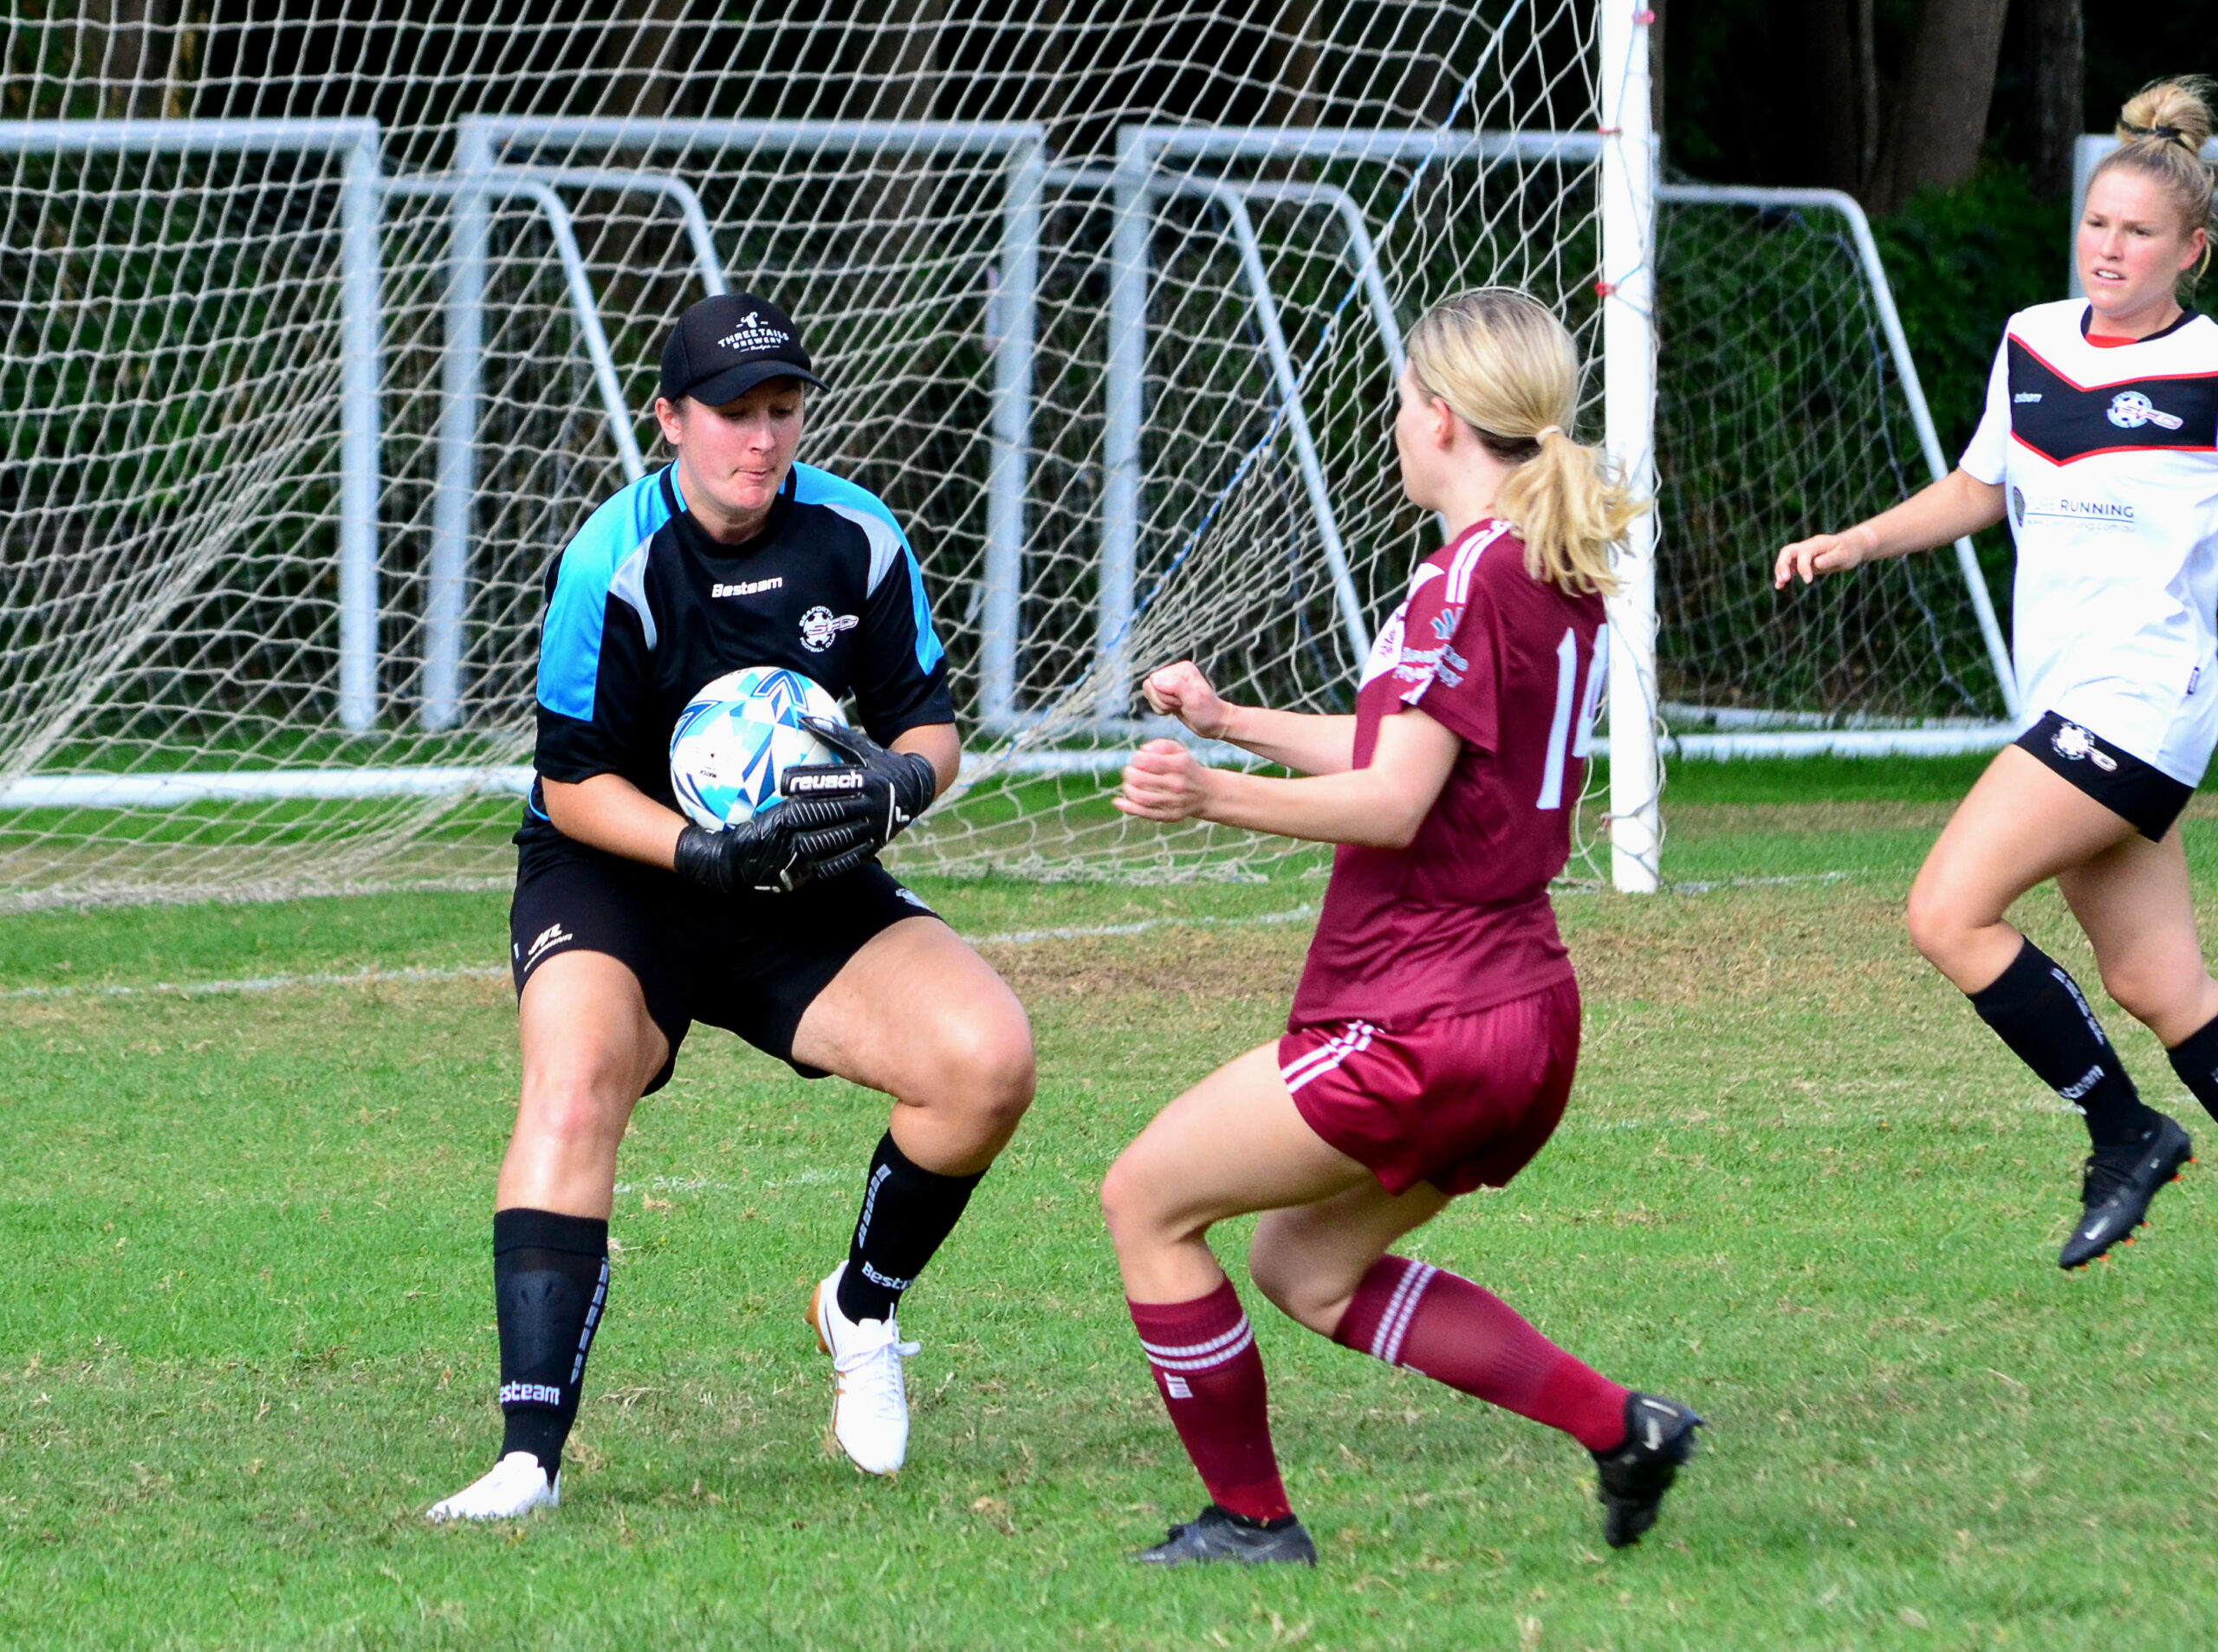 Women's Premier League Round 4: Action from the Round 3 WPL game between Manly Vale and Seaforth. Photo credit: Graeme Bolton